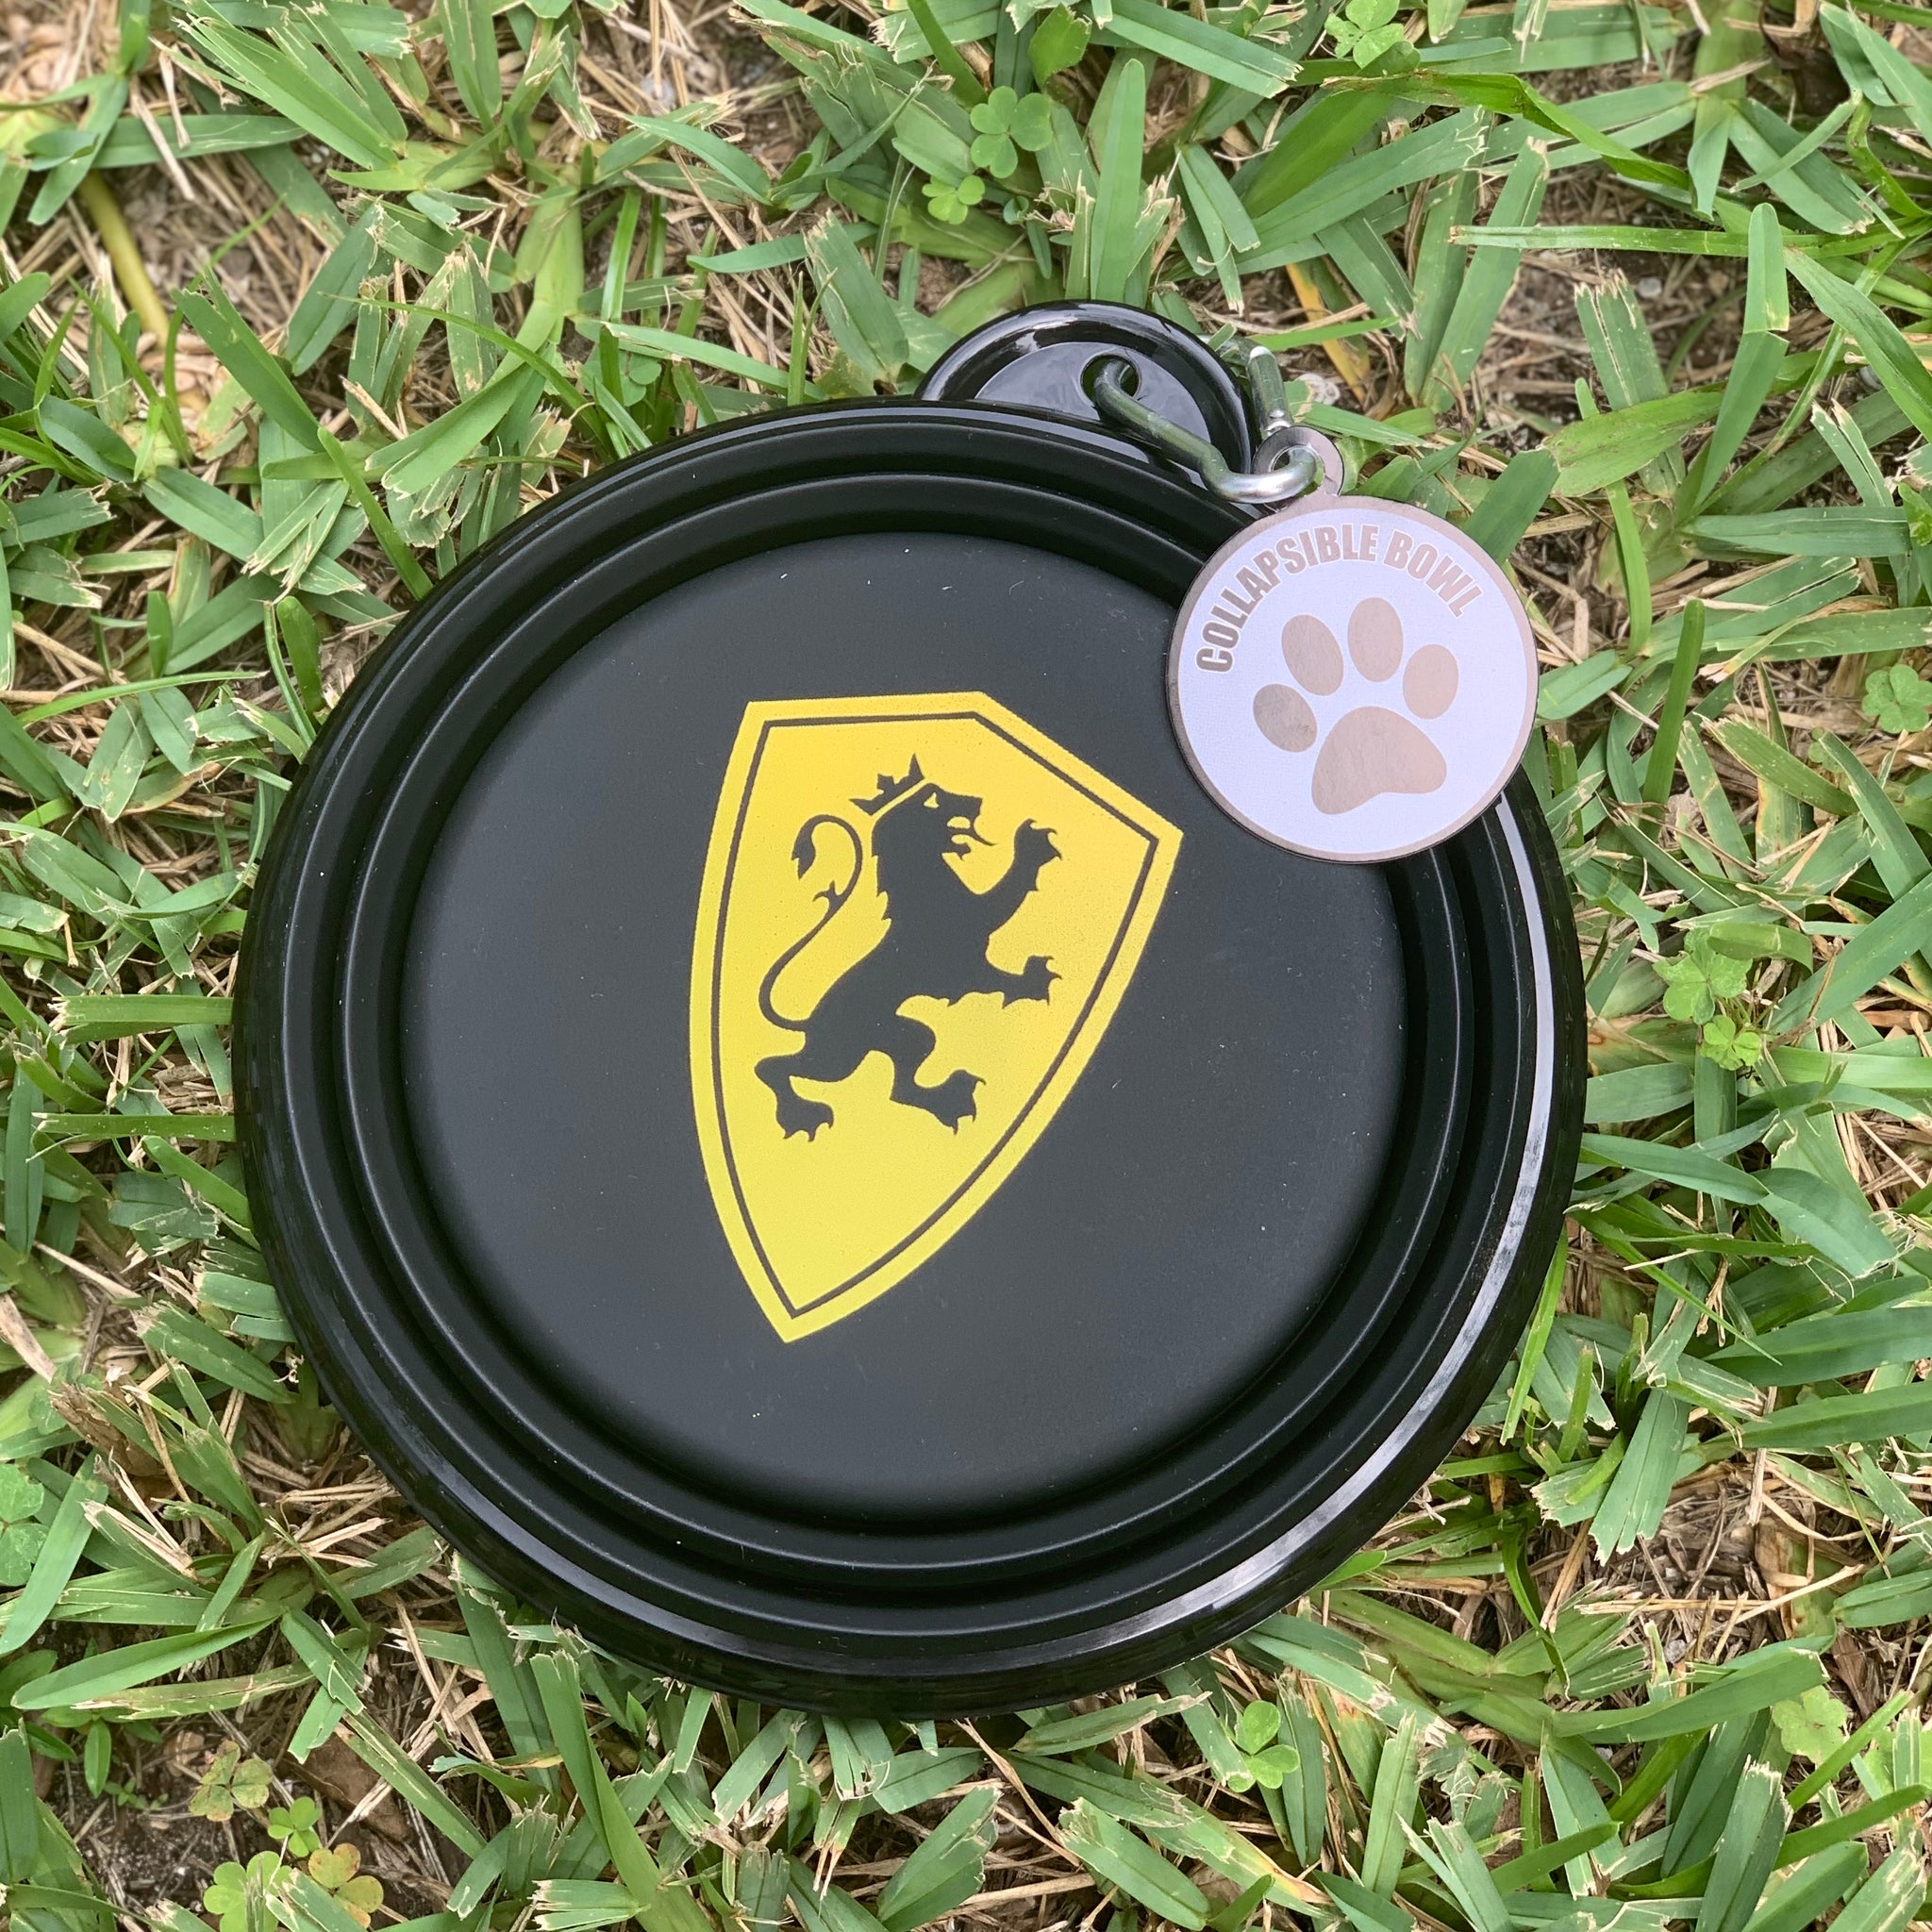 Collapsible water bowl with gold shield